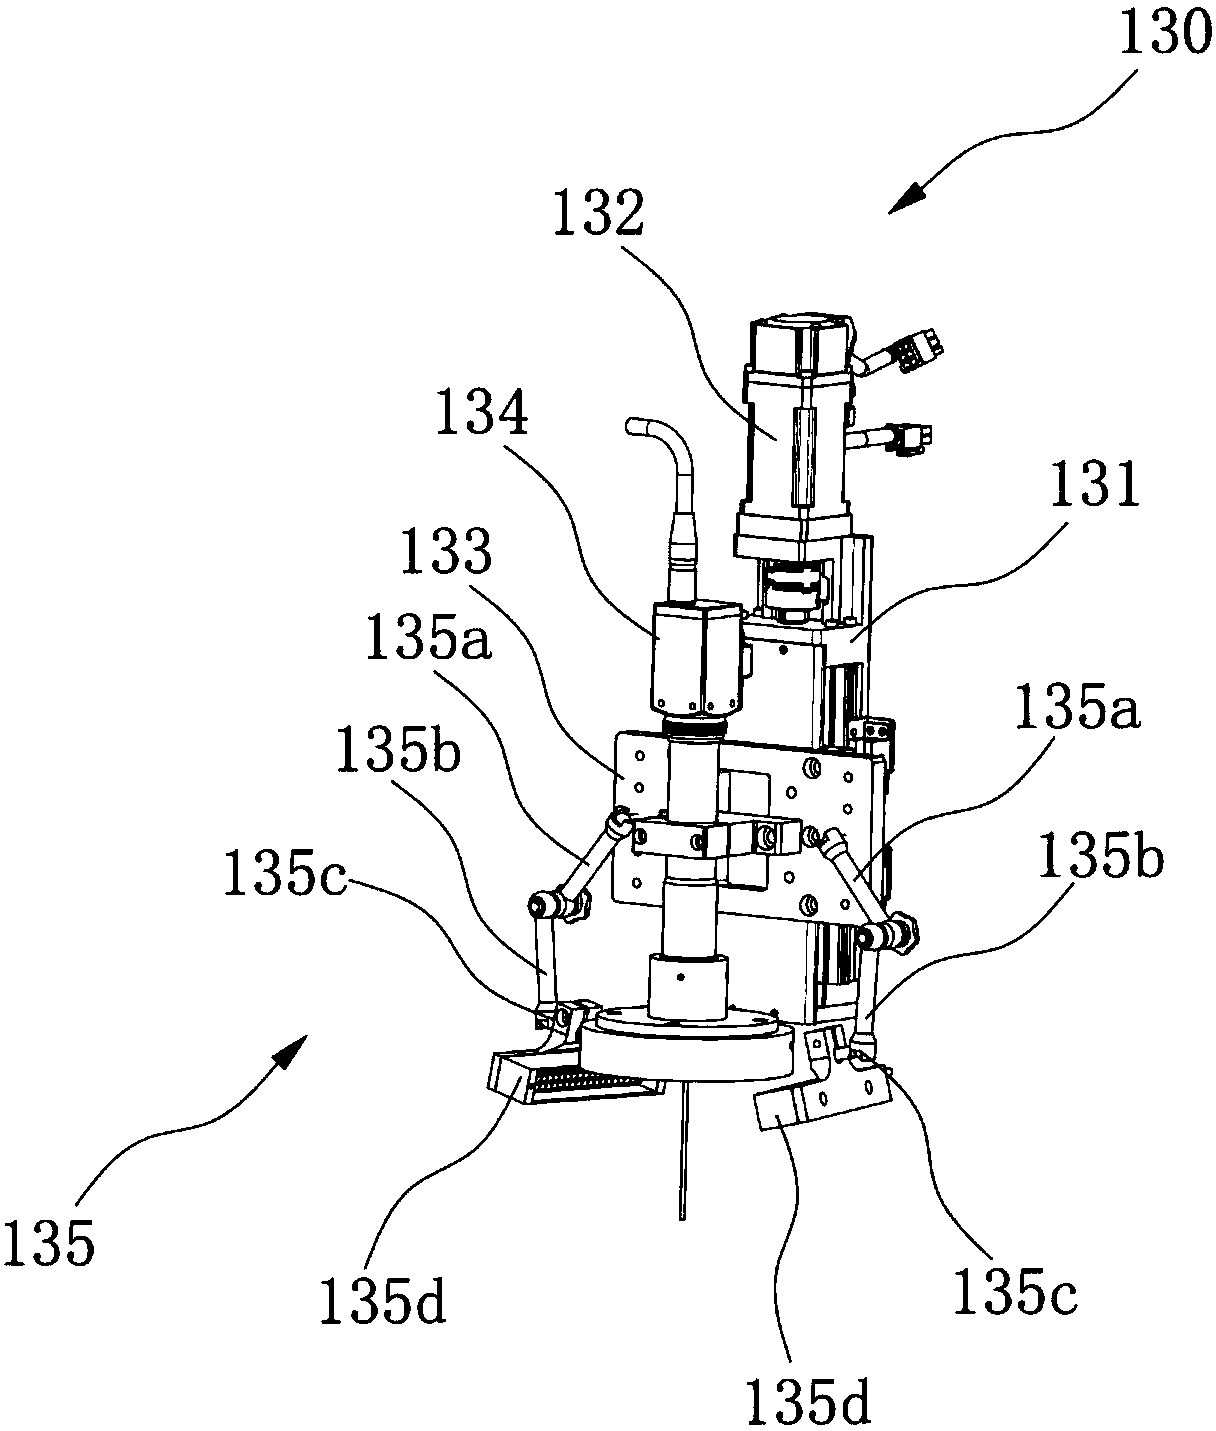 A visual imaging measurement system with adjustable supplementary light and automatic clamping